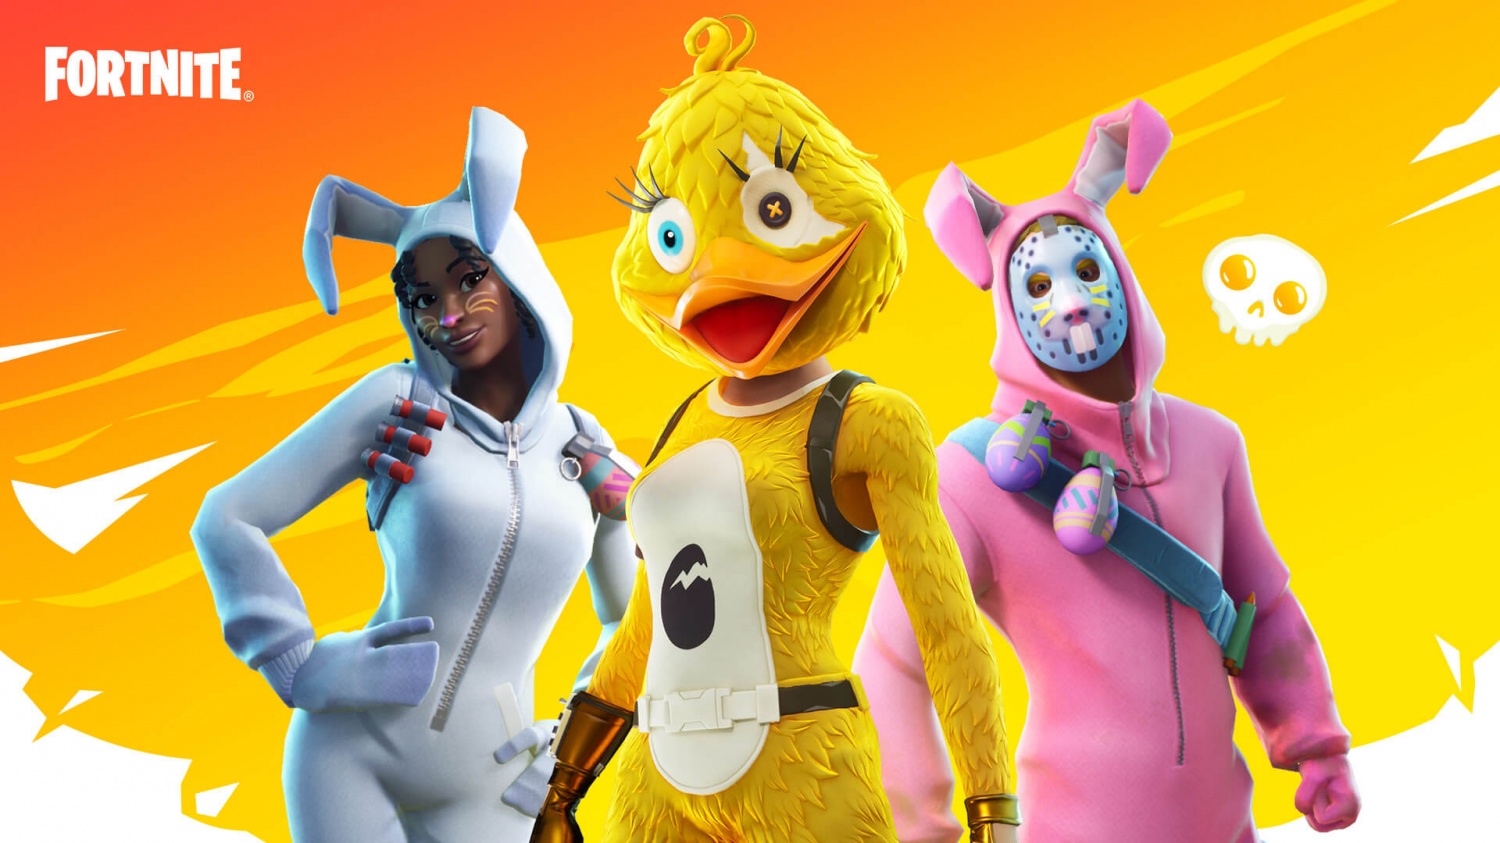 'Fortnite' Easter Eggs Guide 10 Locations to Find Bouncy Eggs and Earn